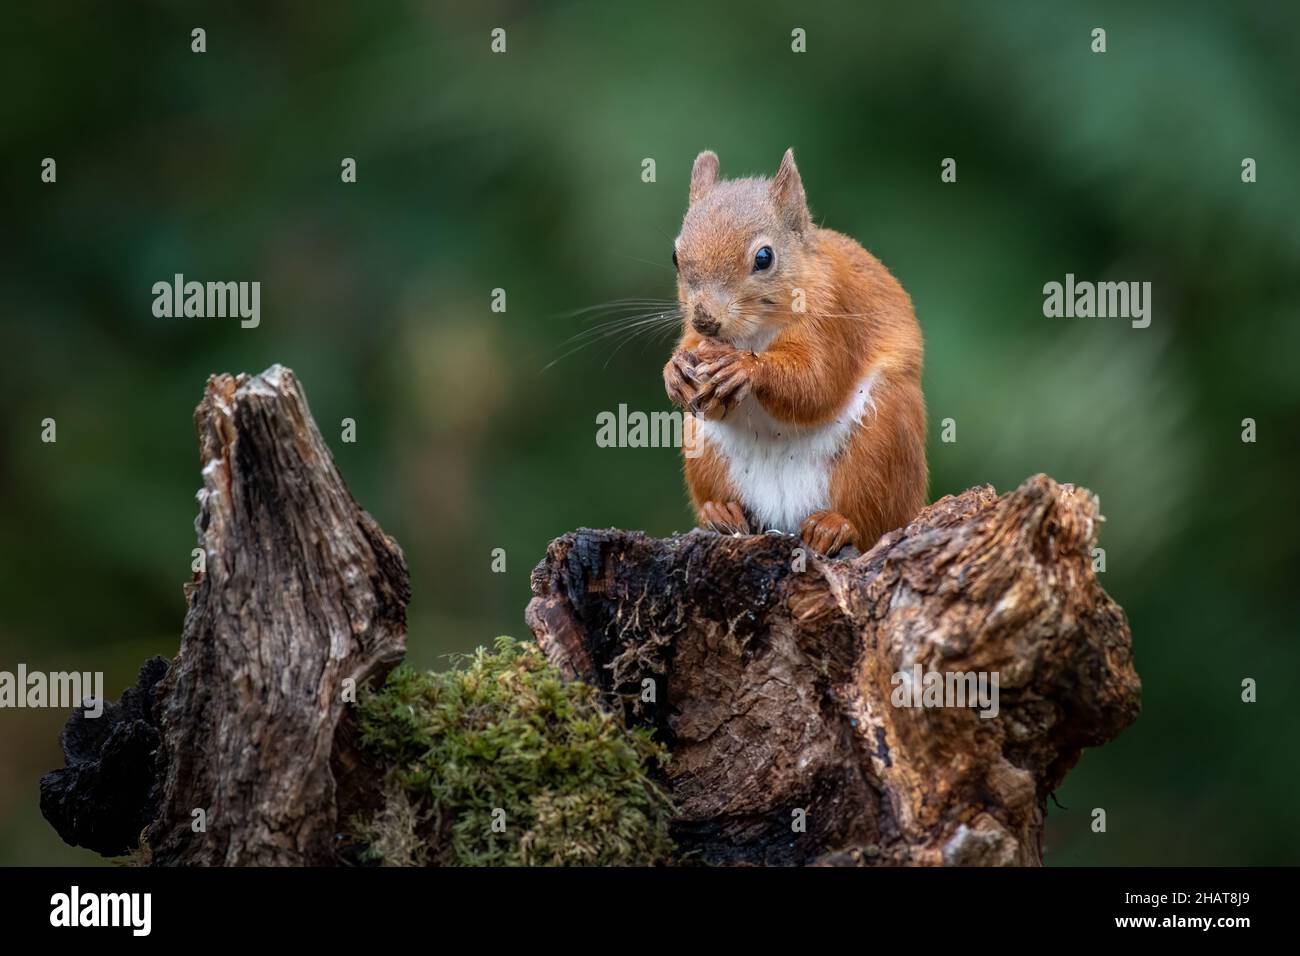 A red squirrel sitting on an old tree stump eating a hazelnut Stock Photo